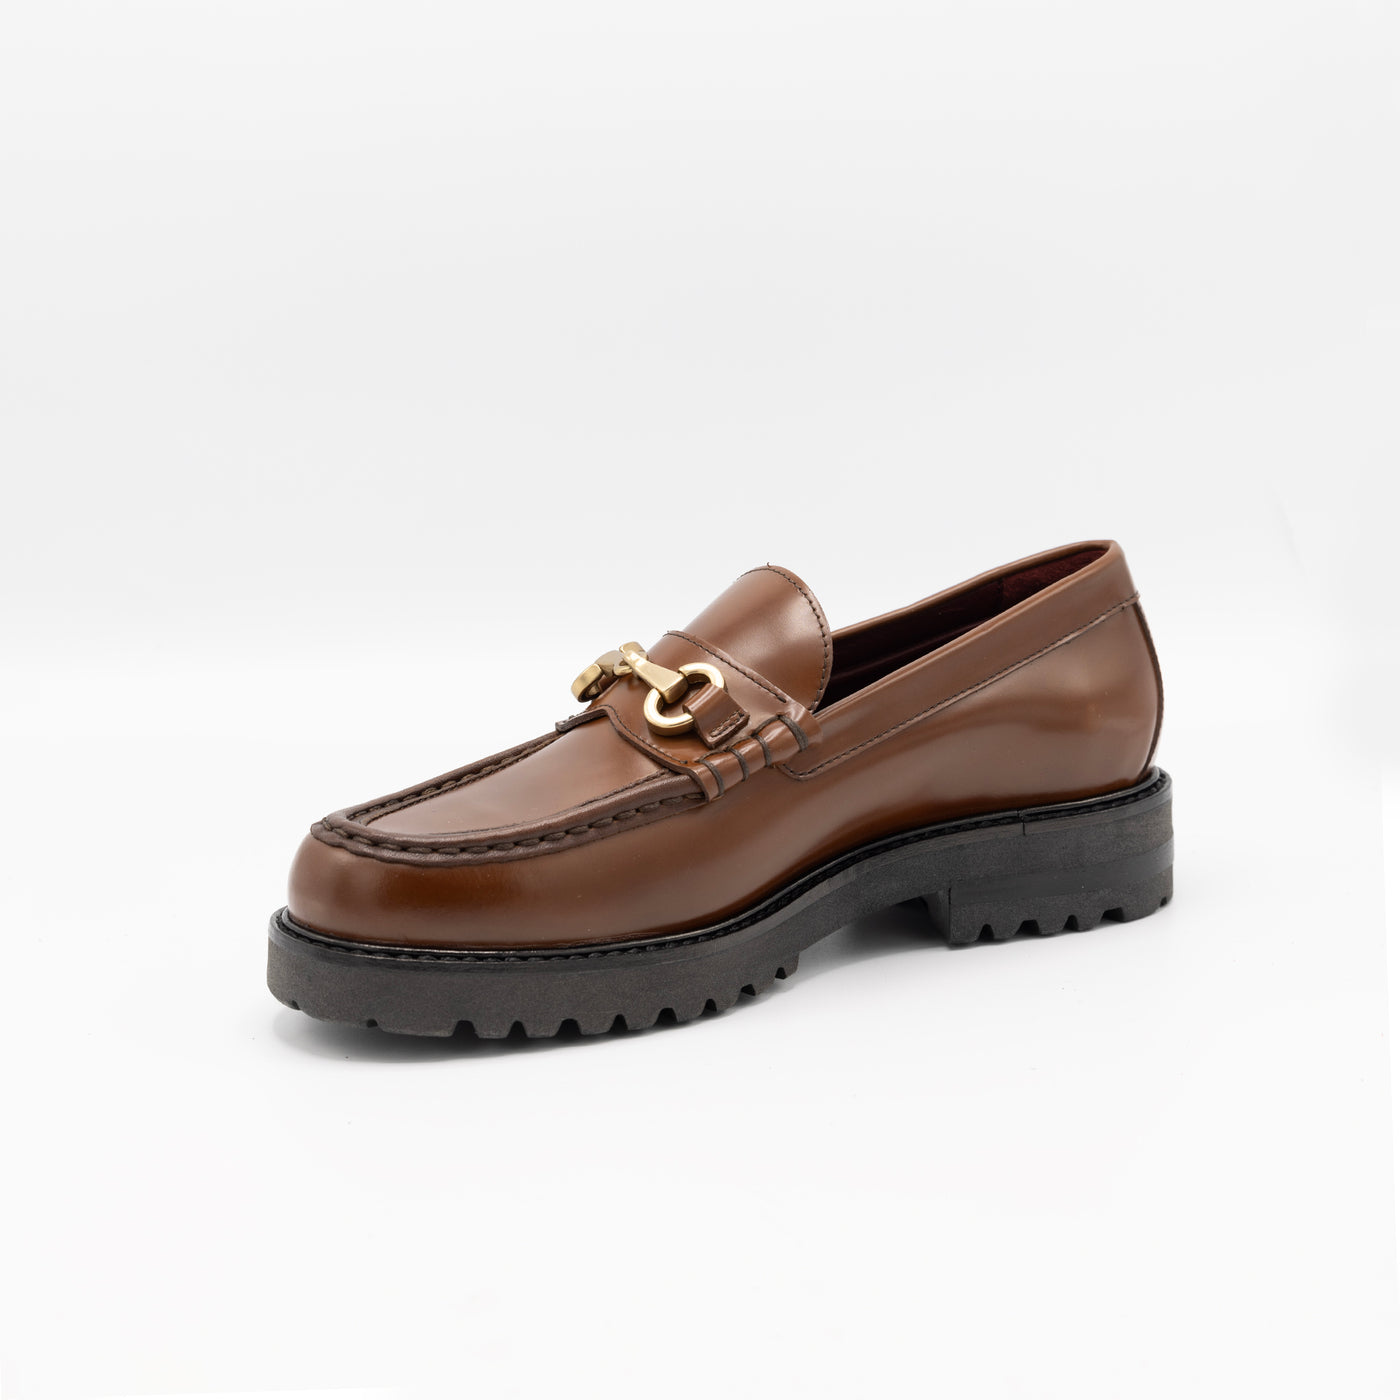 Cunky loafer with horsebit in cognac leather. 